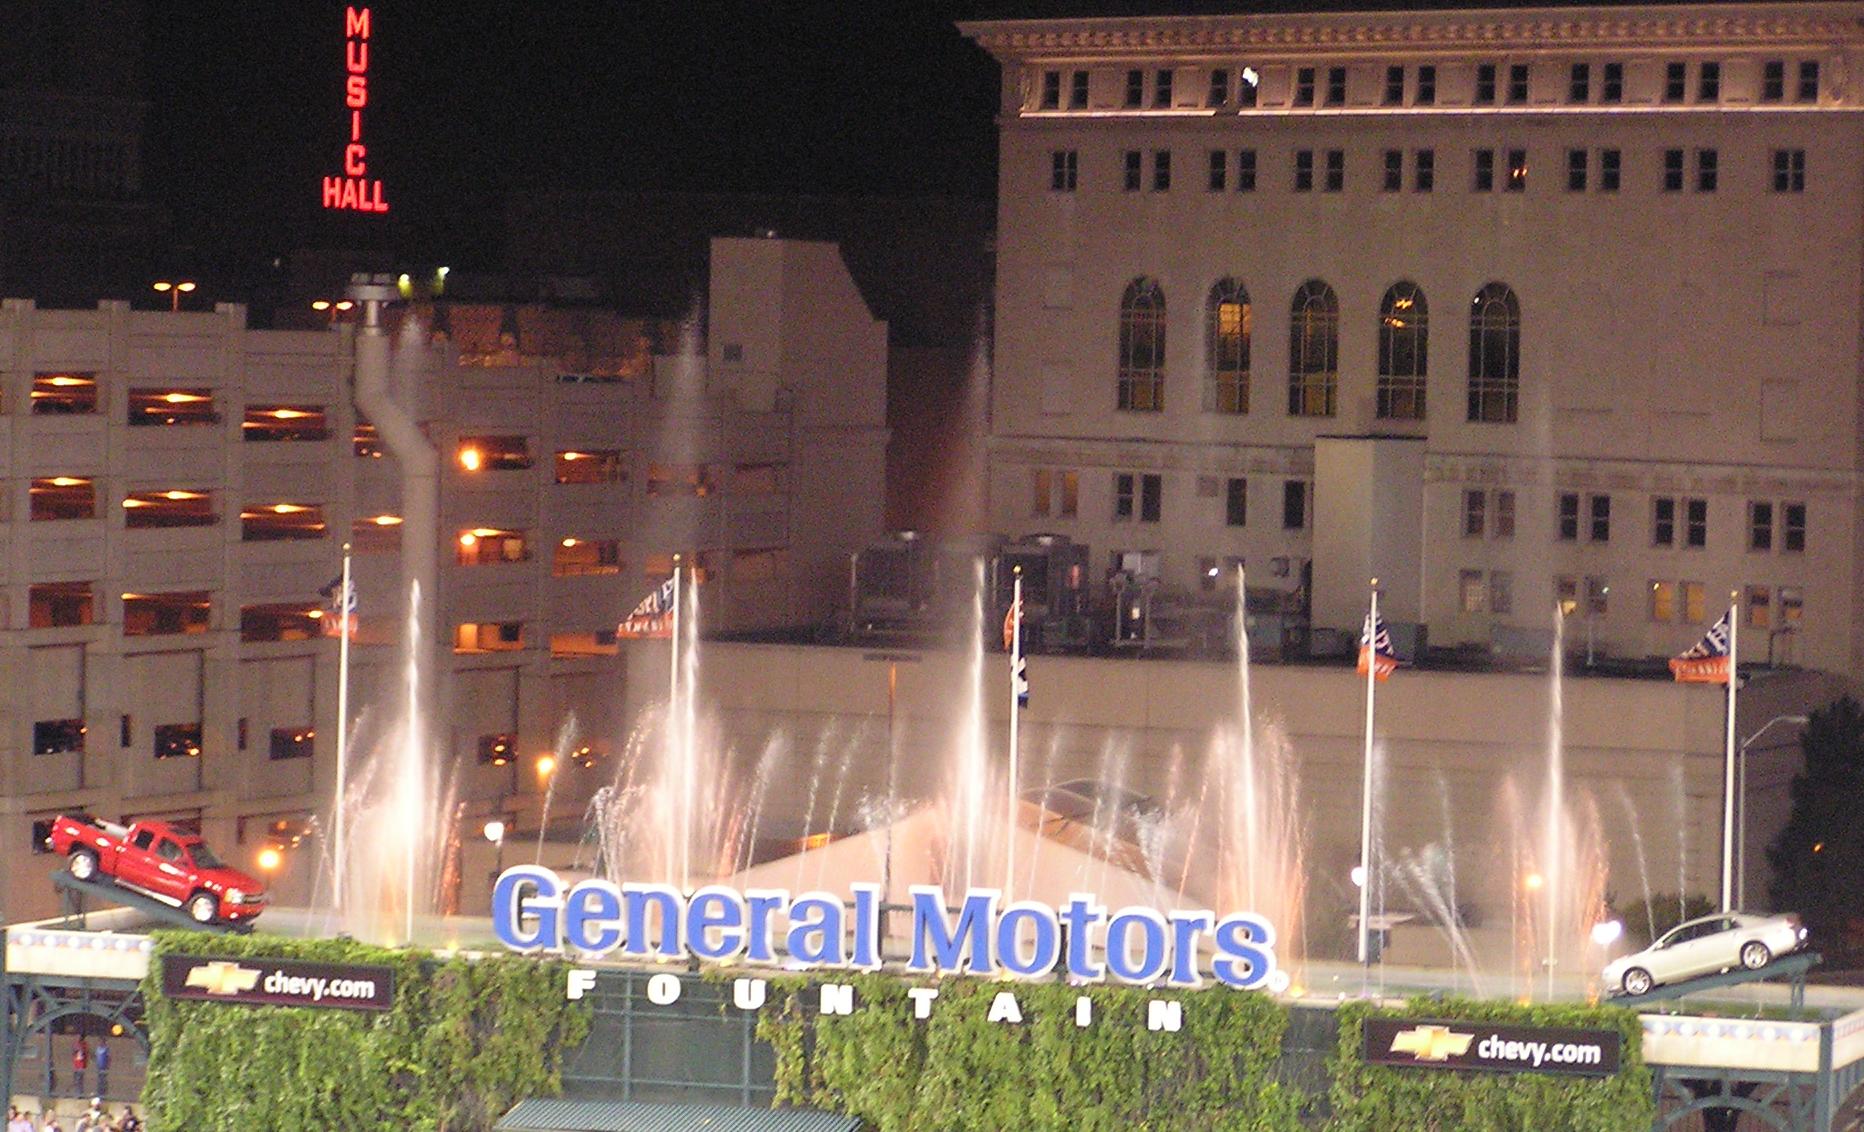 The General Motors Fountains - Comerica Park